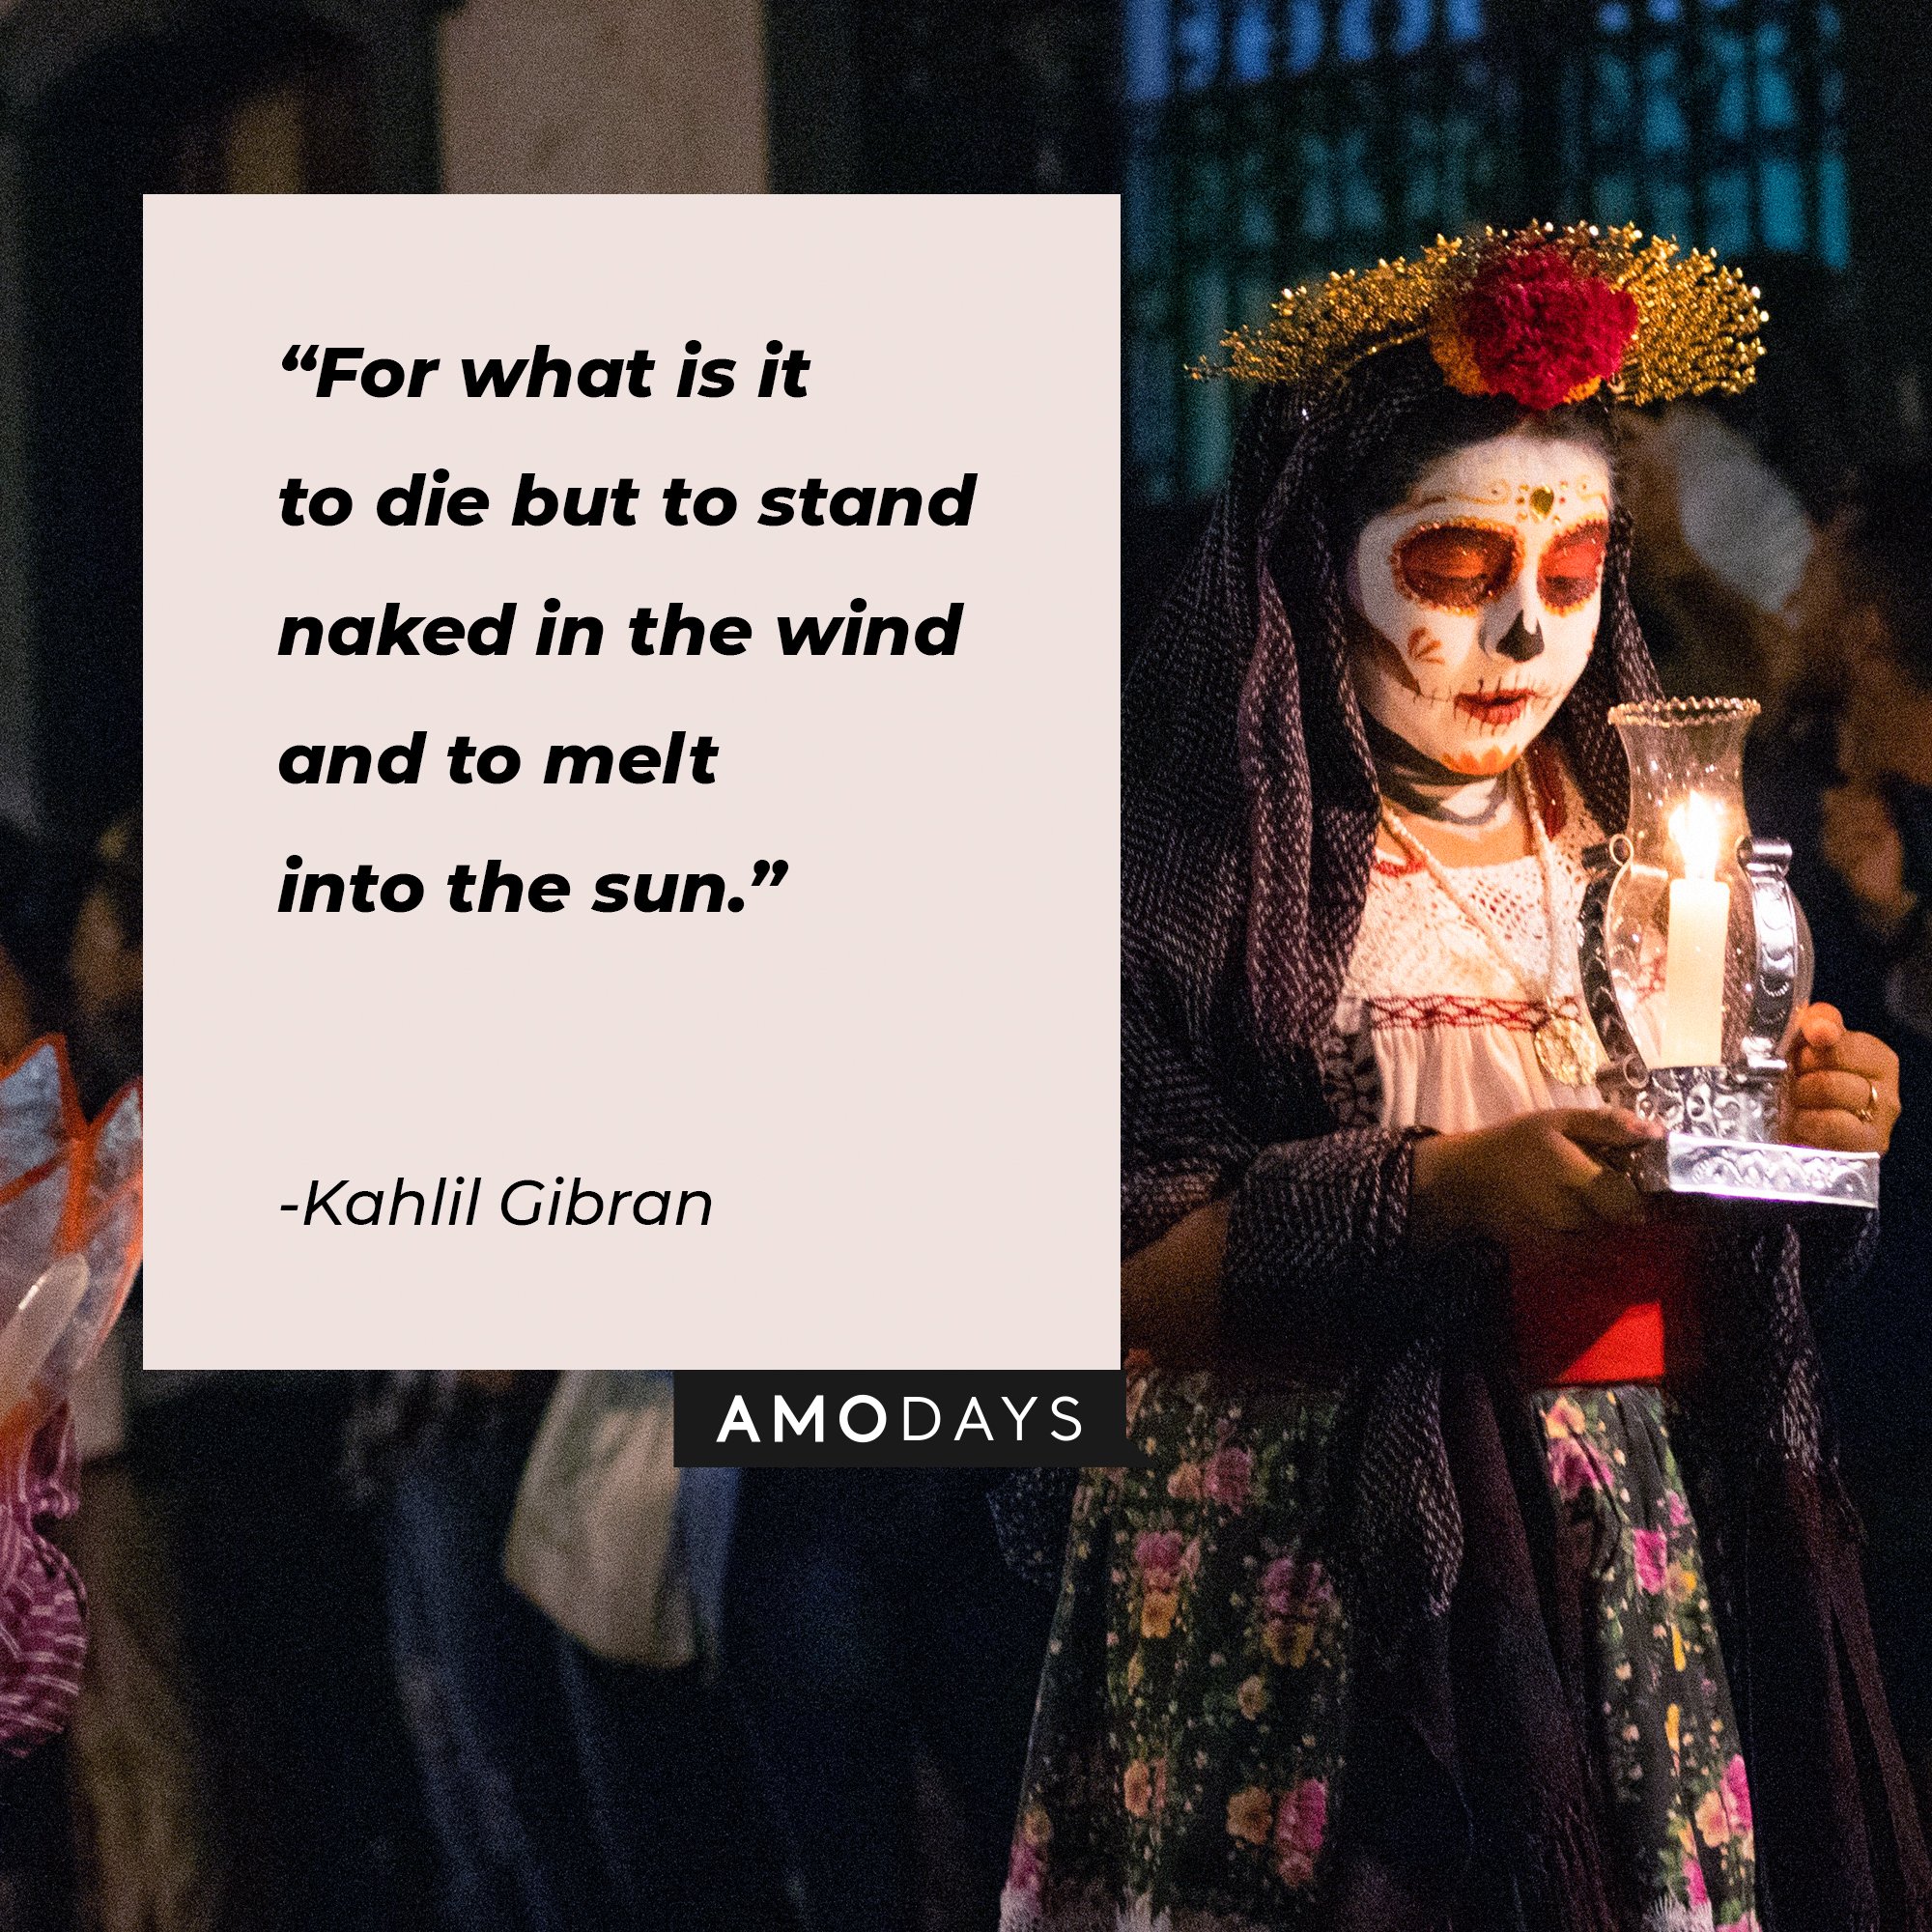 Kahlil Gibran’s quote: "For what is it to die but to stand naked in the wind and to melt into the sun." | Image: AmoDays   